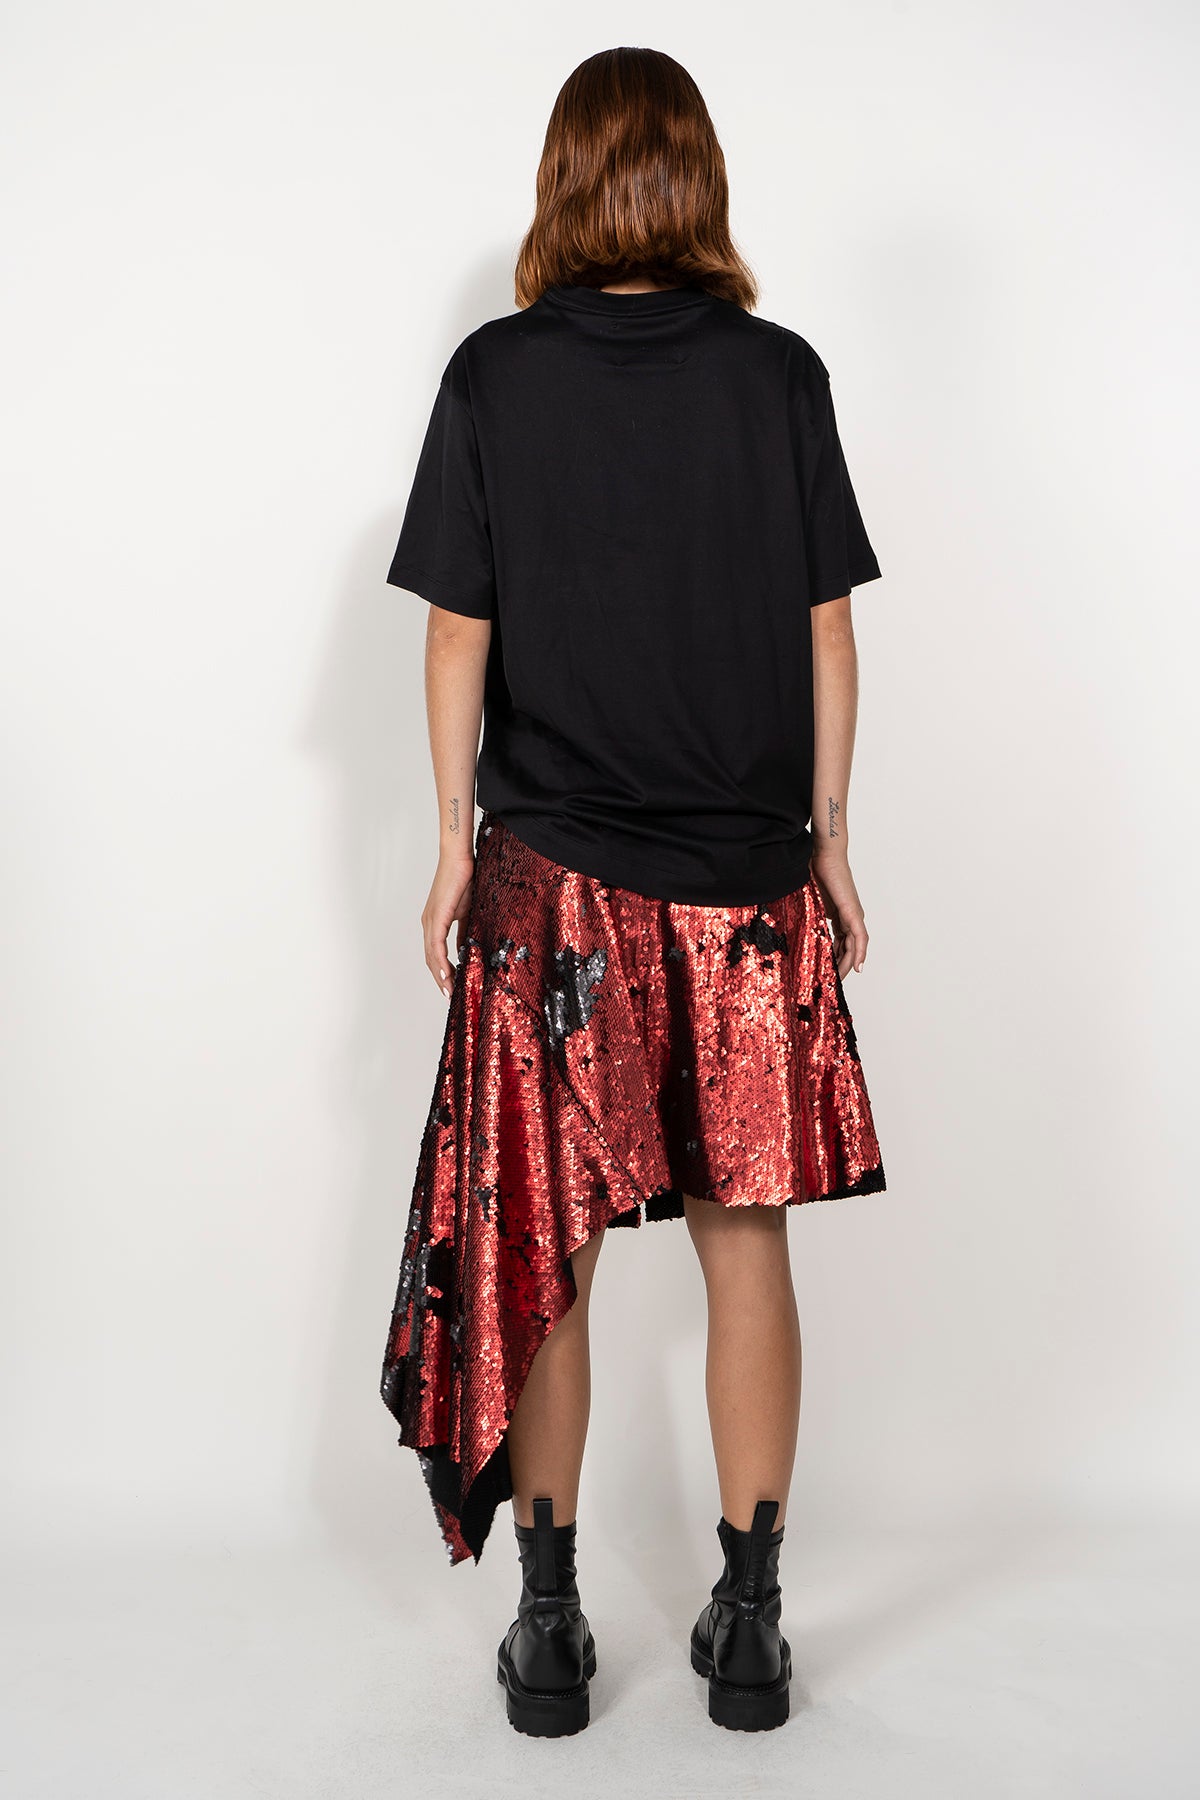 marques almeida PRE-OWNED / RED AND NAVY SEQUIN WRAP SKIRT